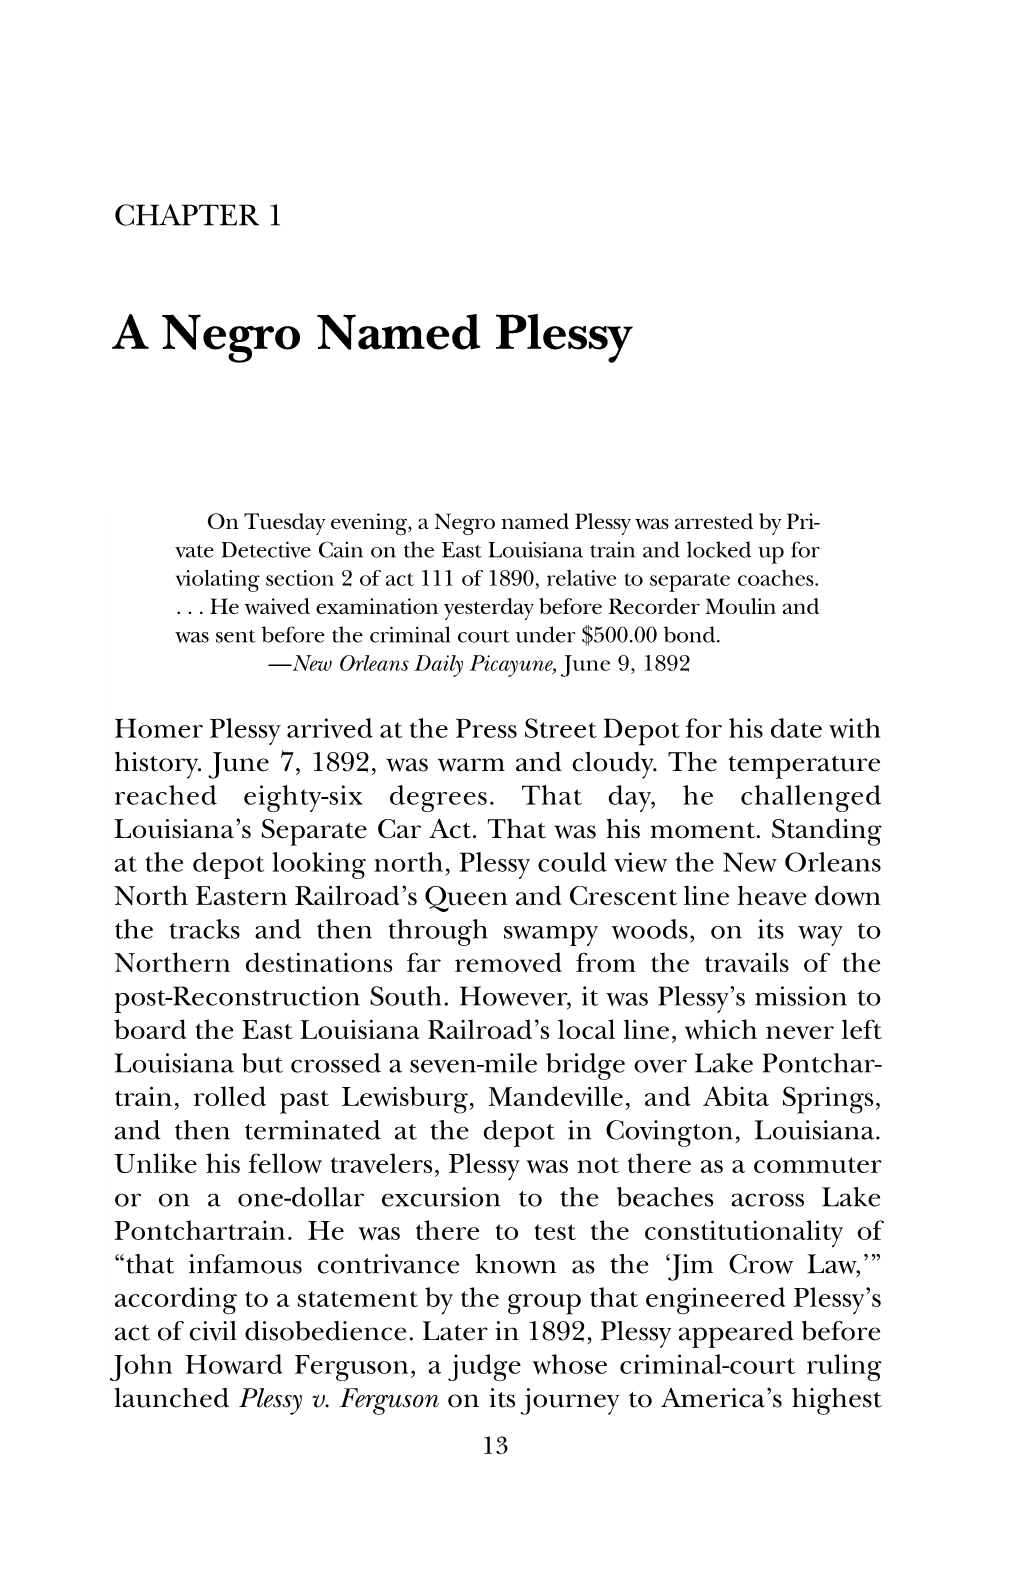 A Negro Named Plessy